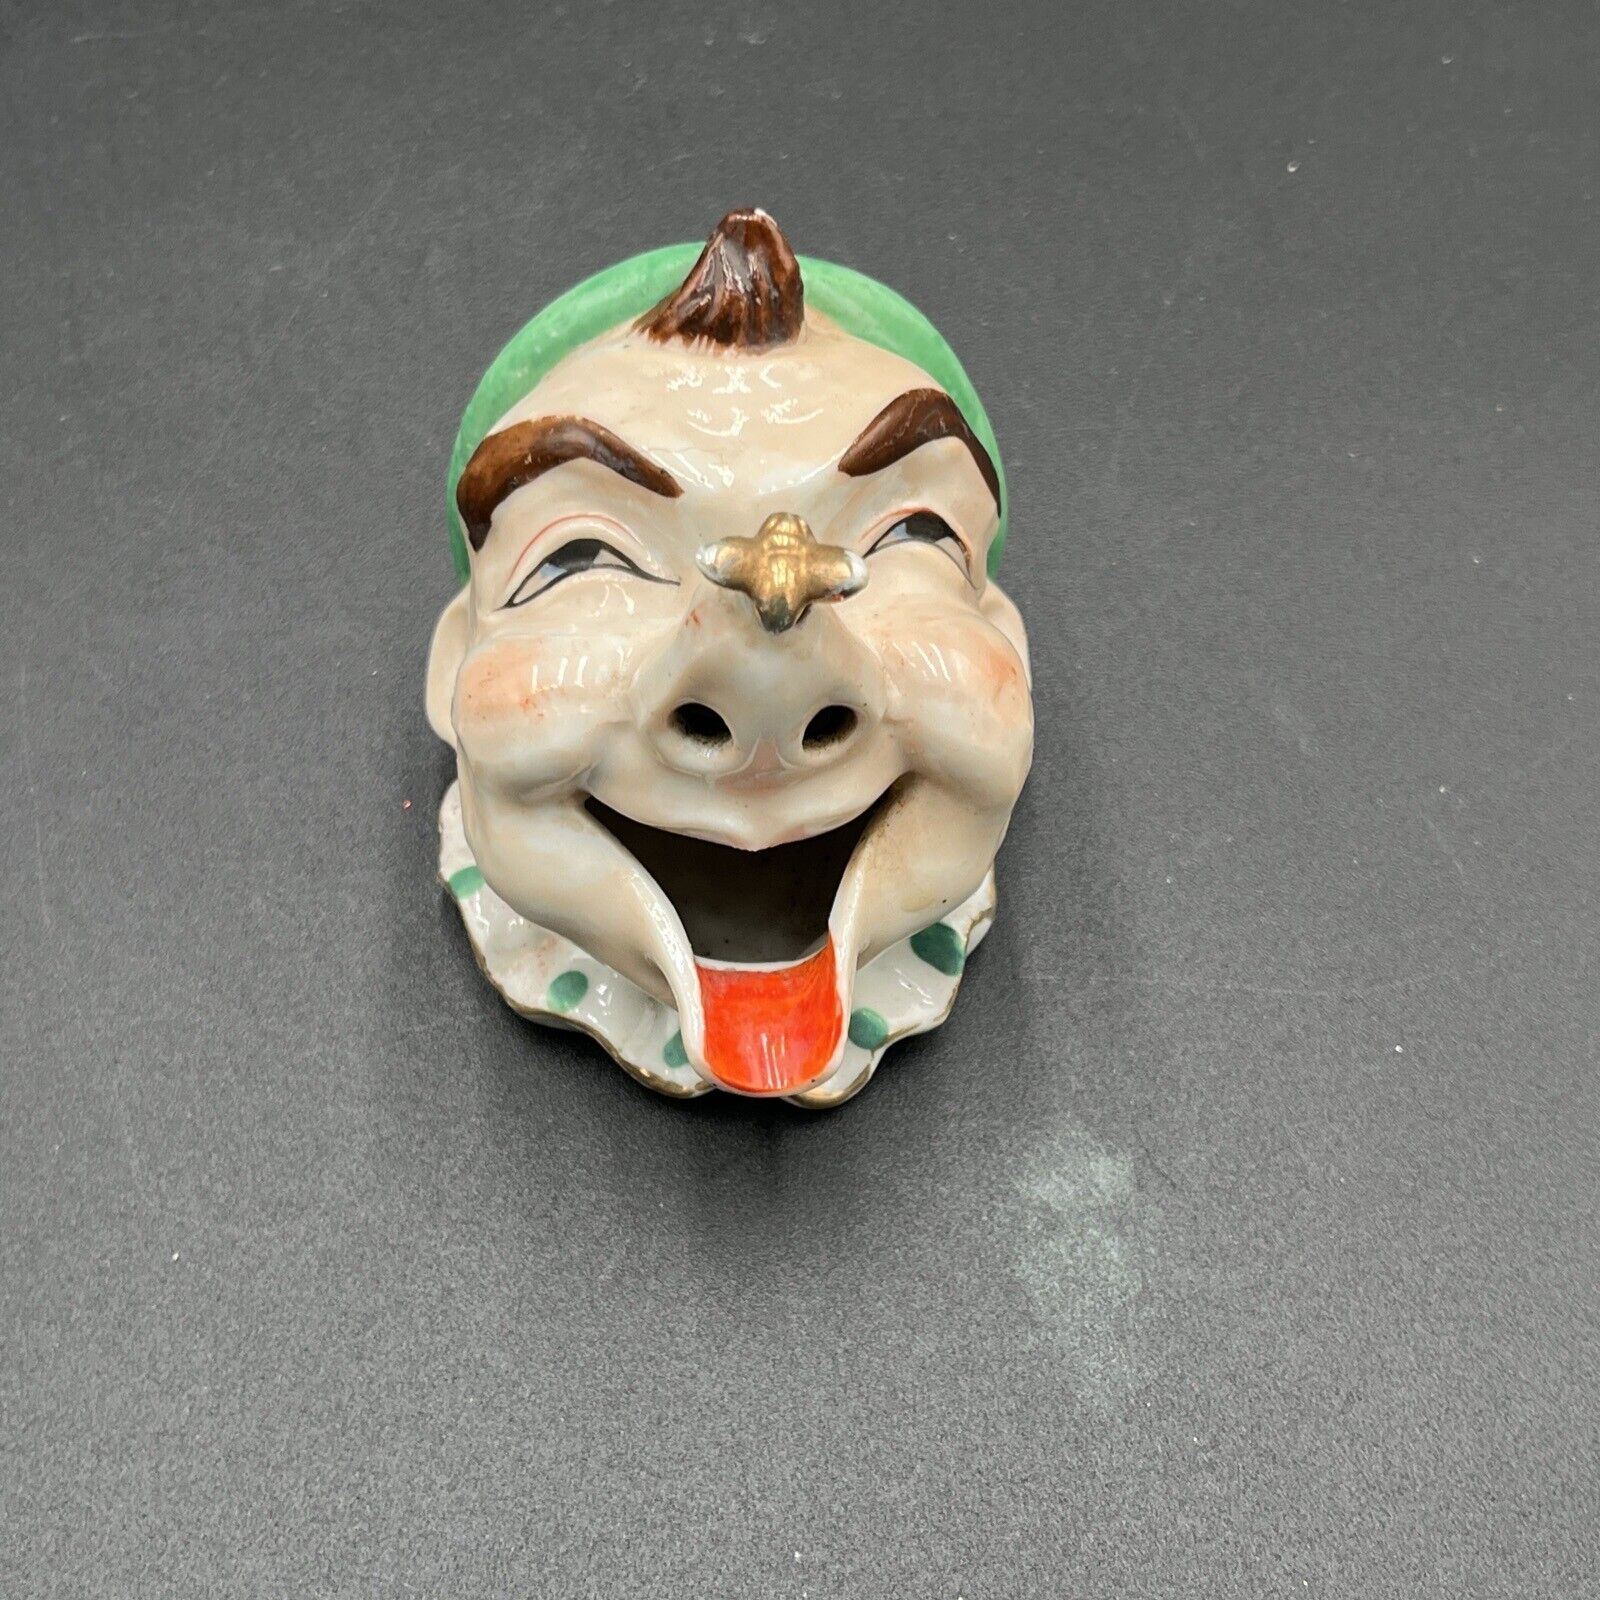 Vintage Ceramic Open Mouth Ashtray Smoker Nose Clown w Bee Made in Japan FR/SHP